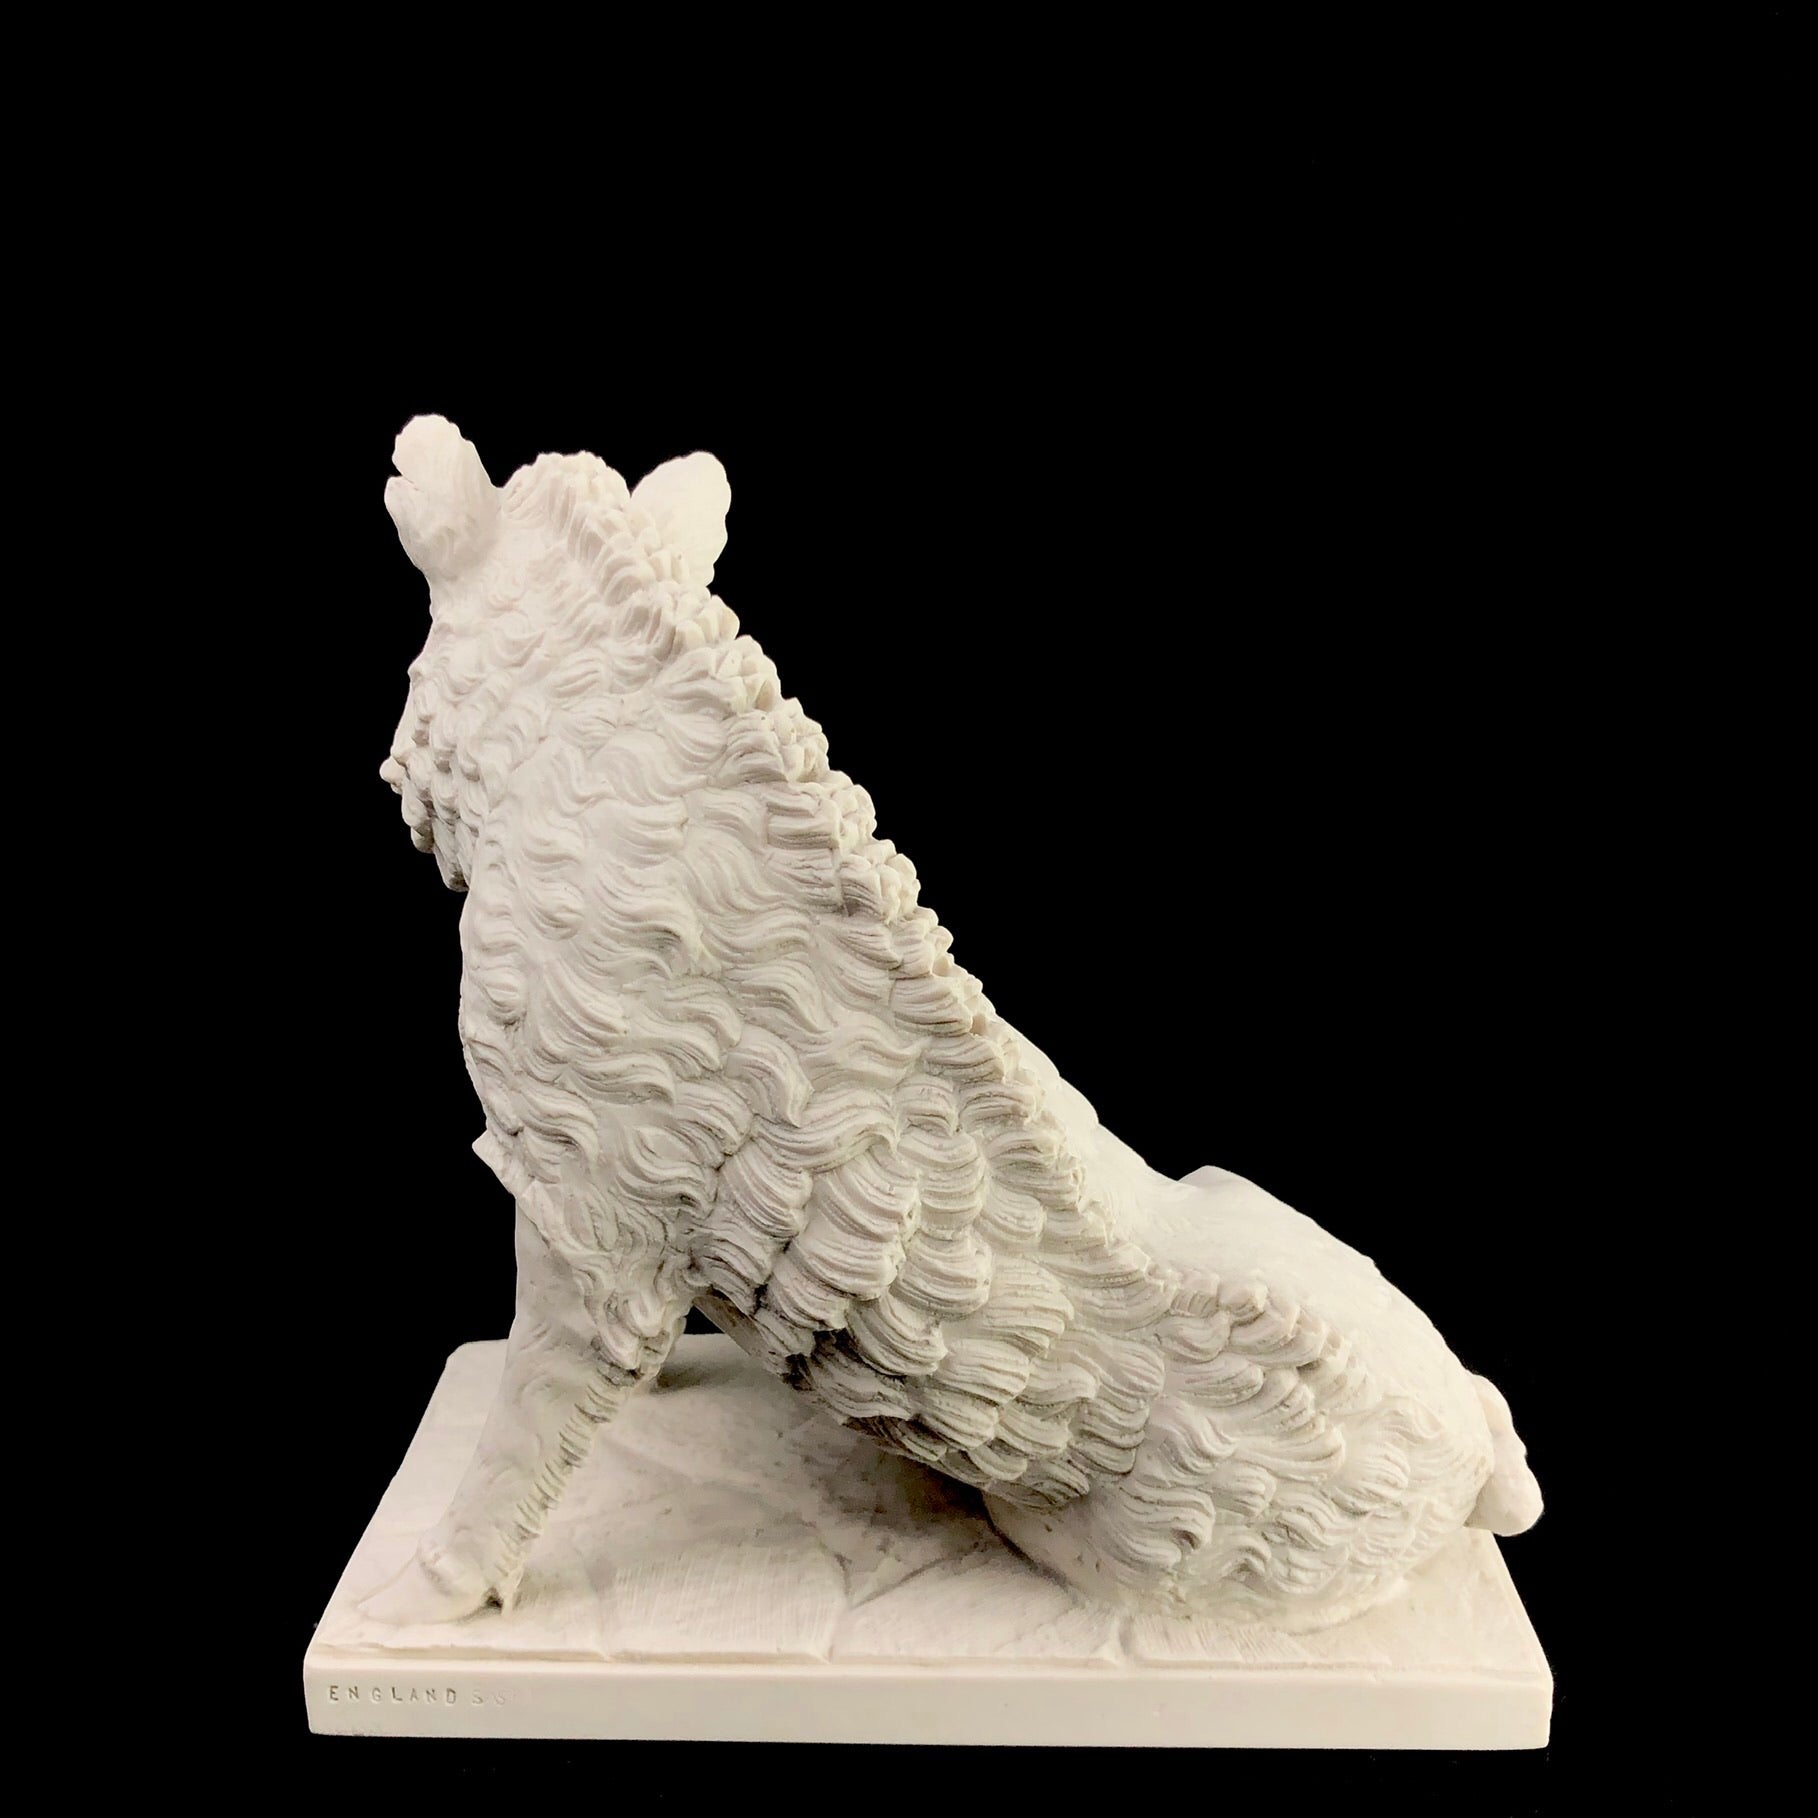 Back view of Marble Boar Sculpture